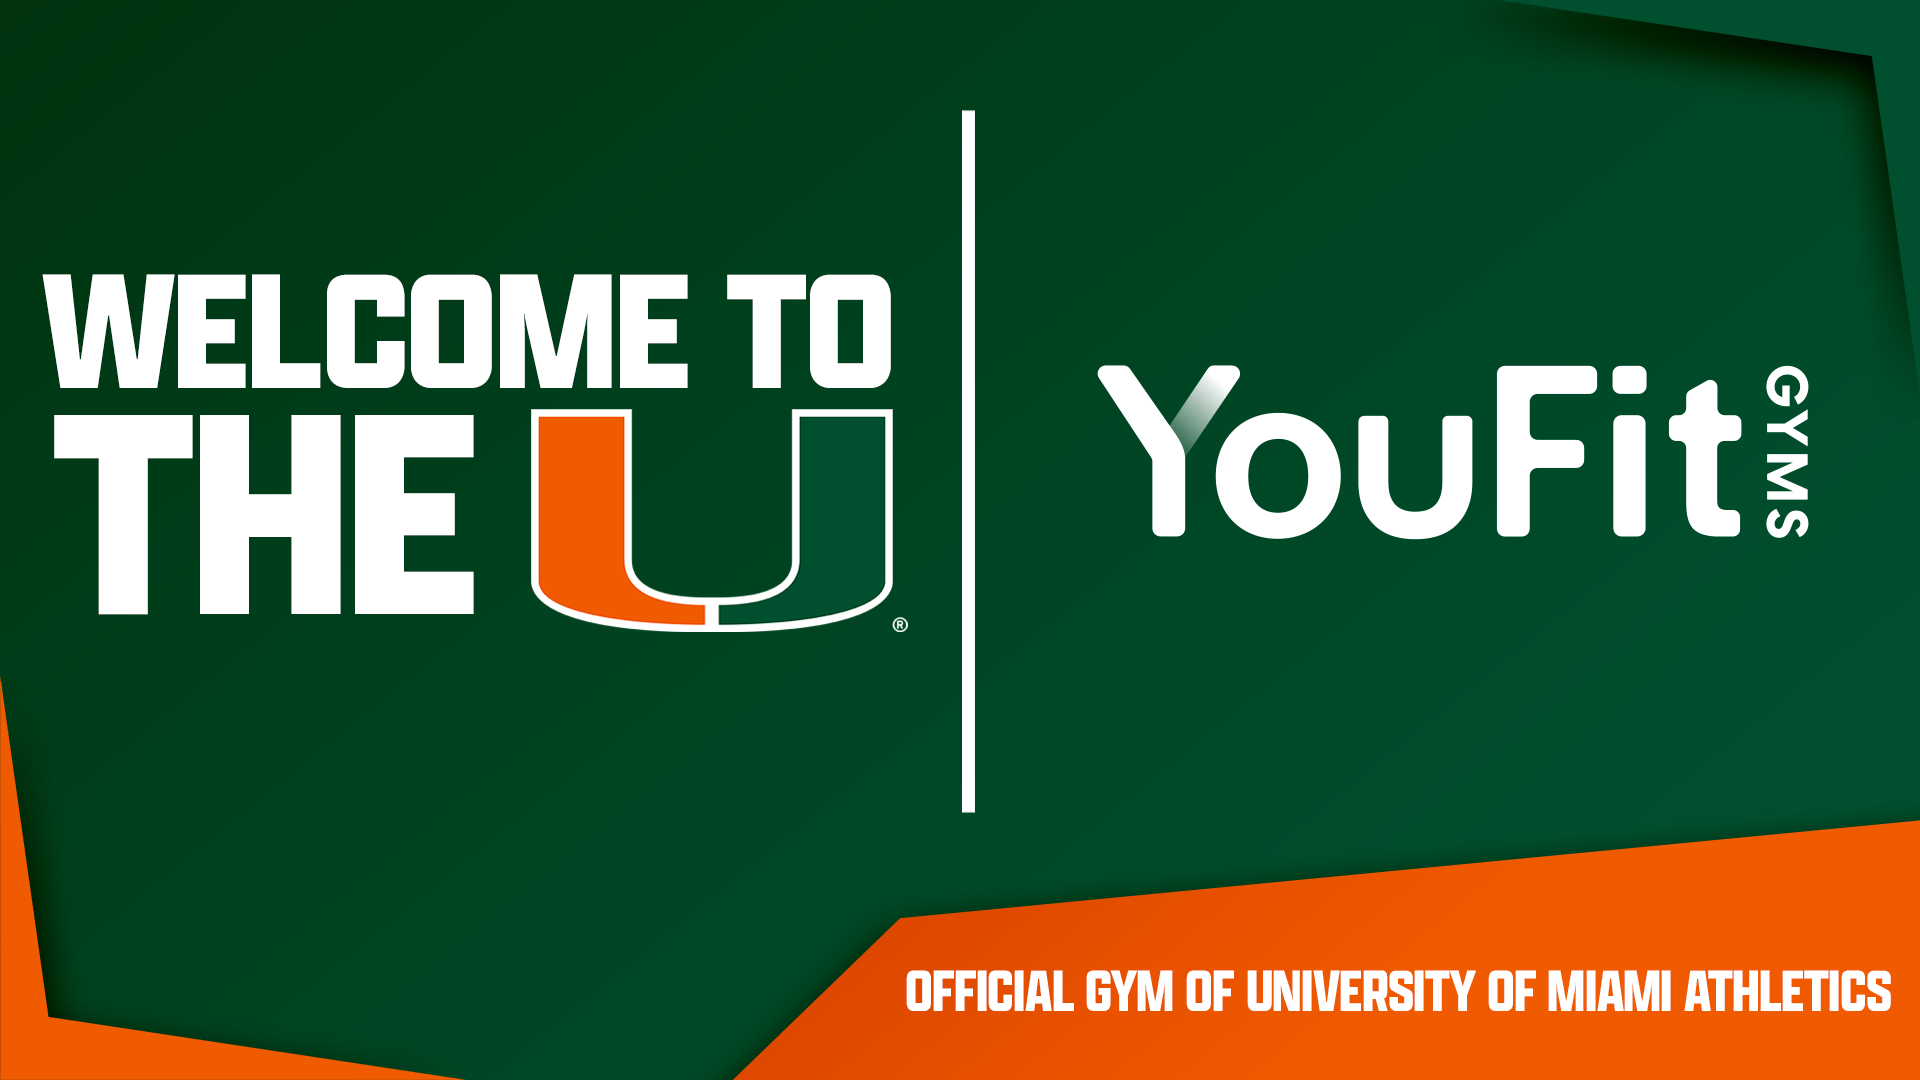 YouFit Gyms Named Official Gym of University of Miami Athletics